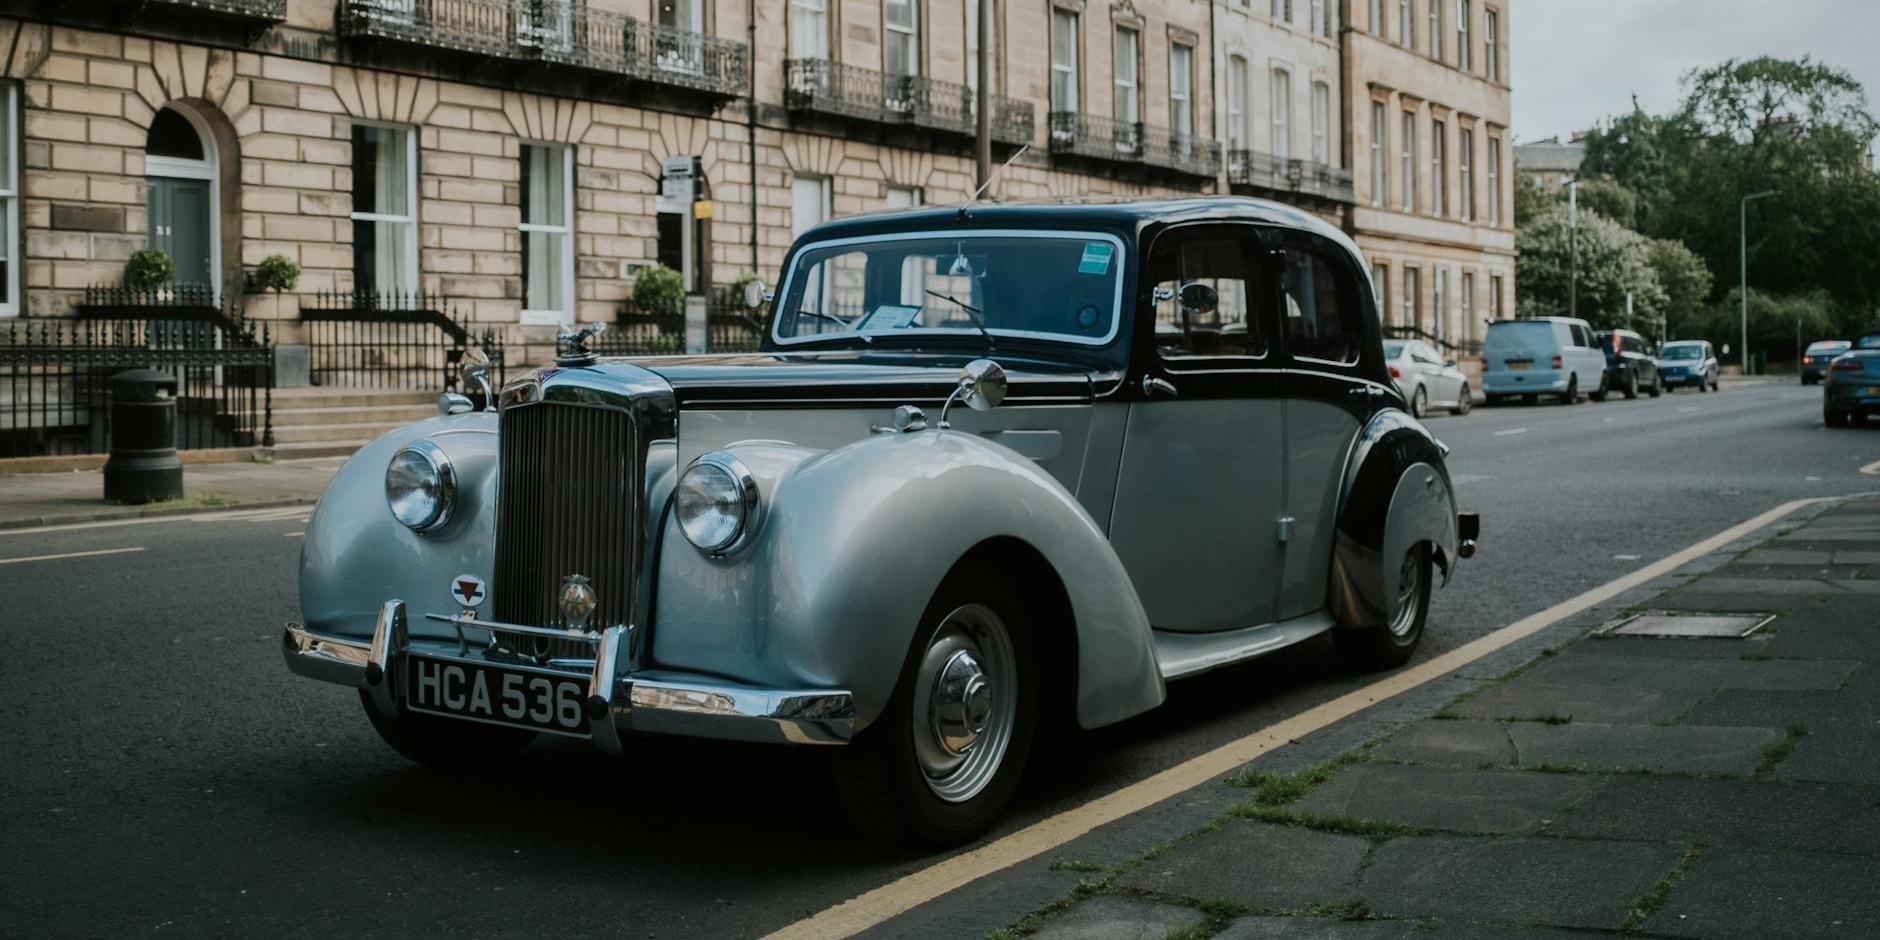 Top Tips for Affordable Wedding Car Hire in Greater London